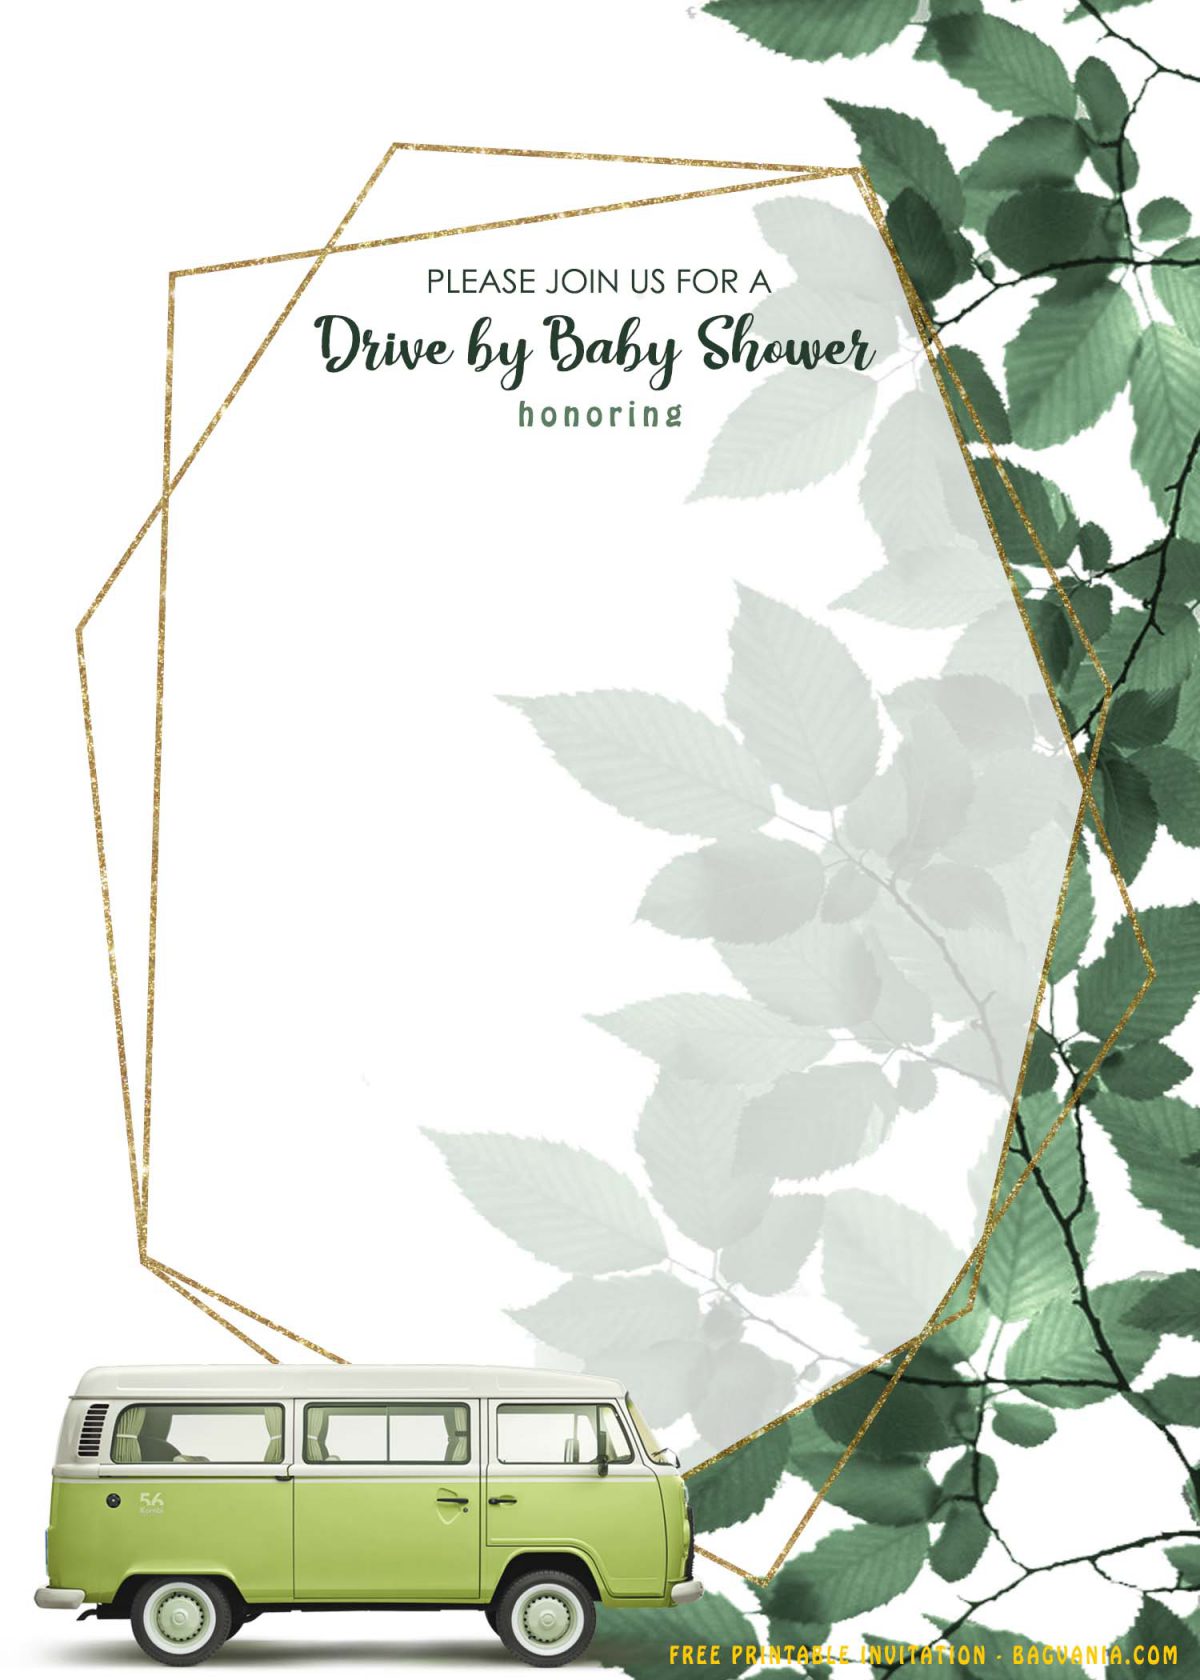 Free Printable Retro Floral Drive By Baby Shower Invitation Templates With Vintage VW Vans